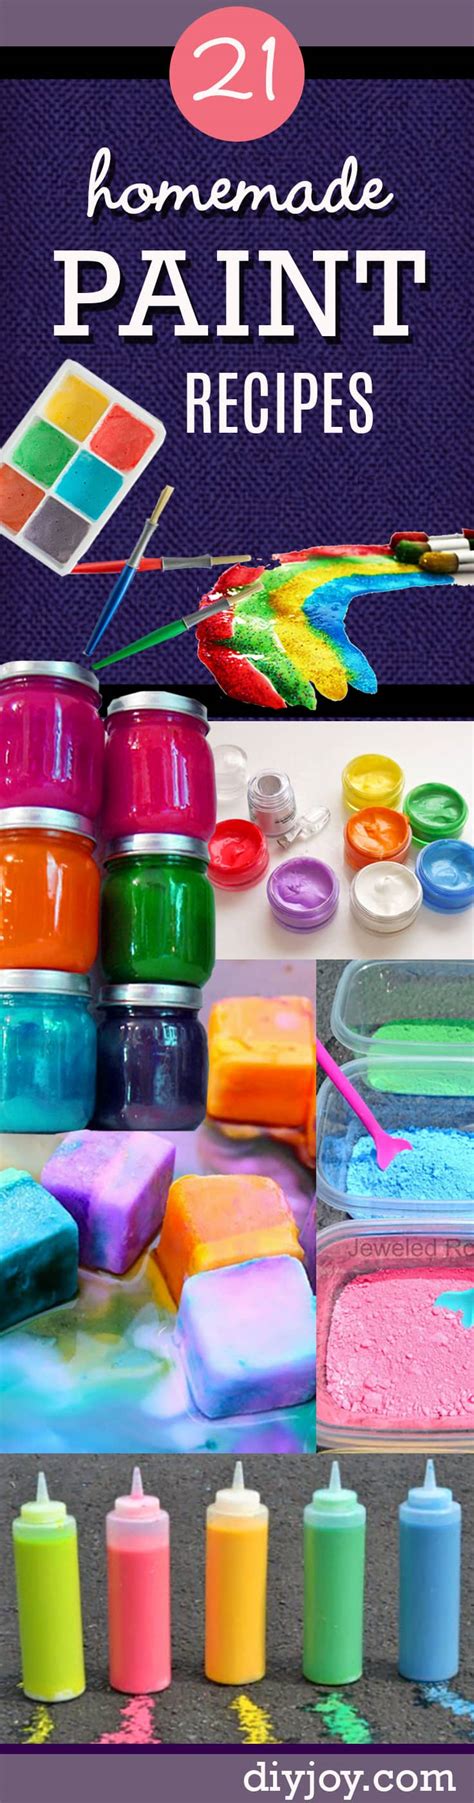 21 Easy Diy Paint Recipes Your Kids Will Go Crazy For